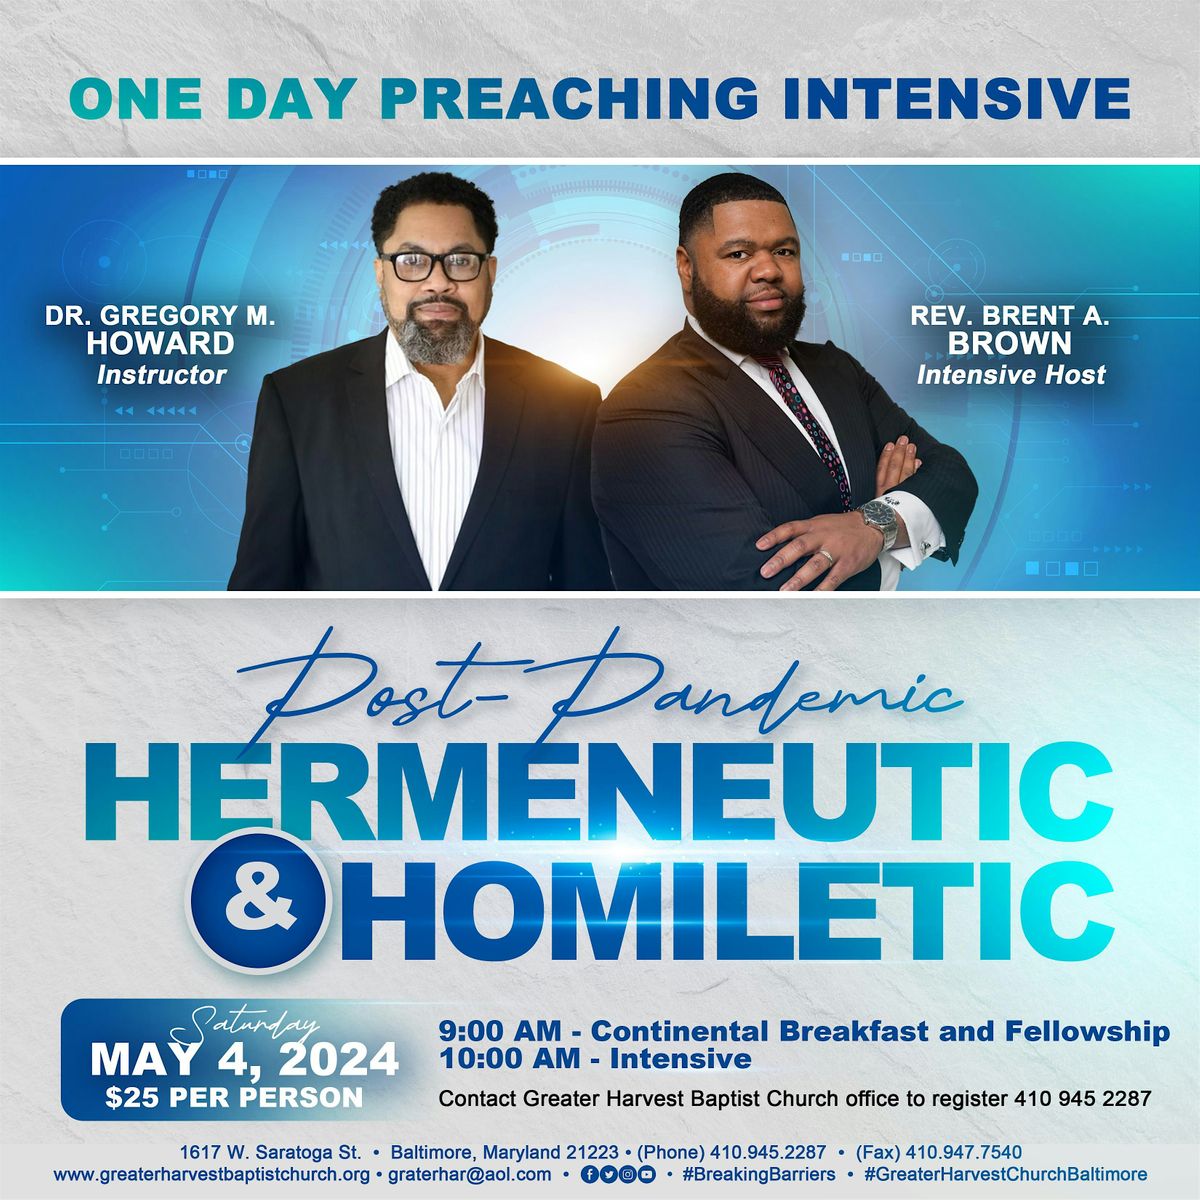 One Day Preaching Intensive